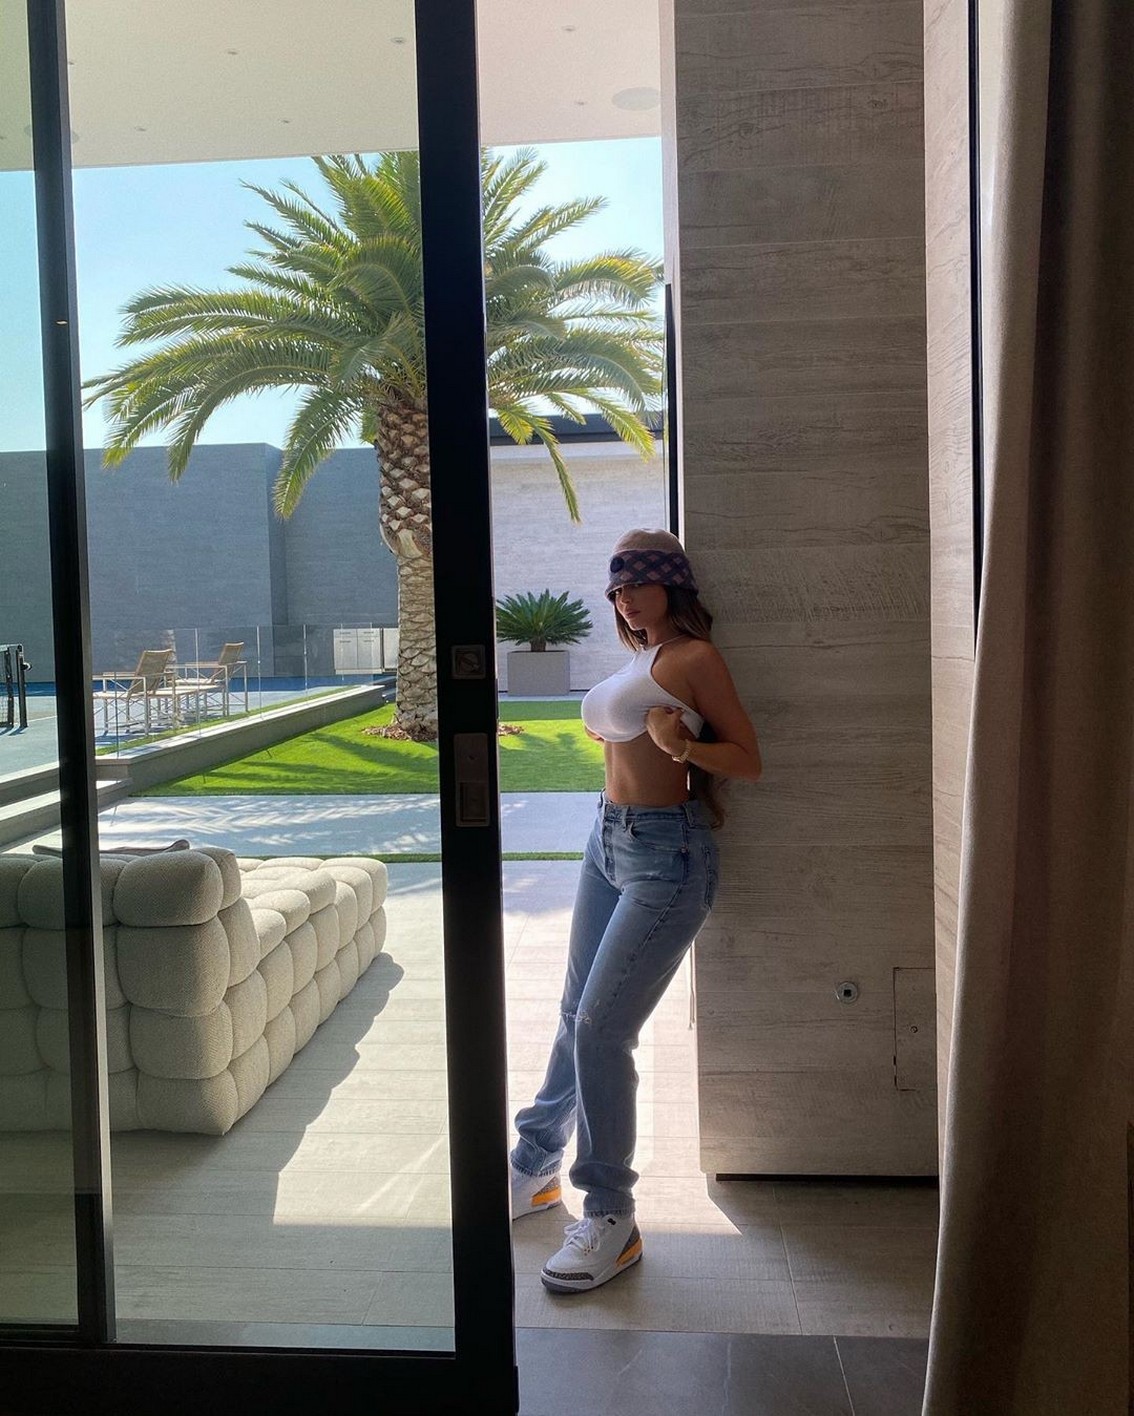 Kylie Jenner Big Tits Small Top TheFappeningPro 4 - Kylie Jenner Showed Off Big Tits In A White Top (5 Photos)